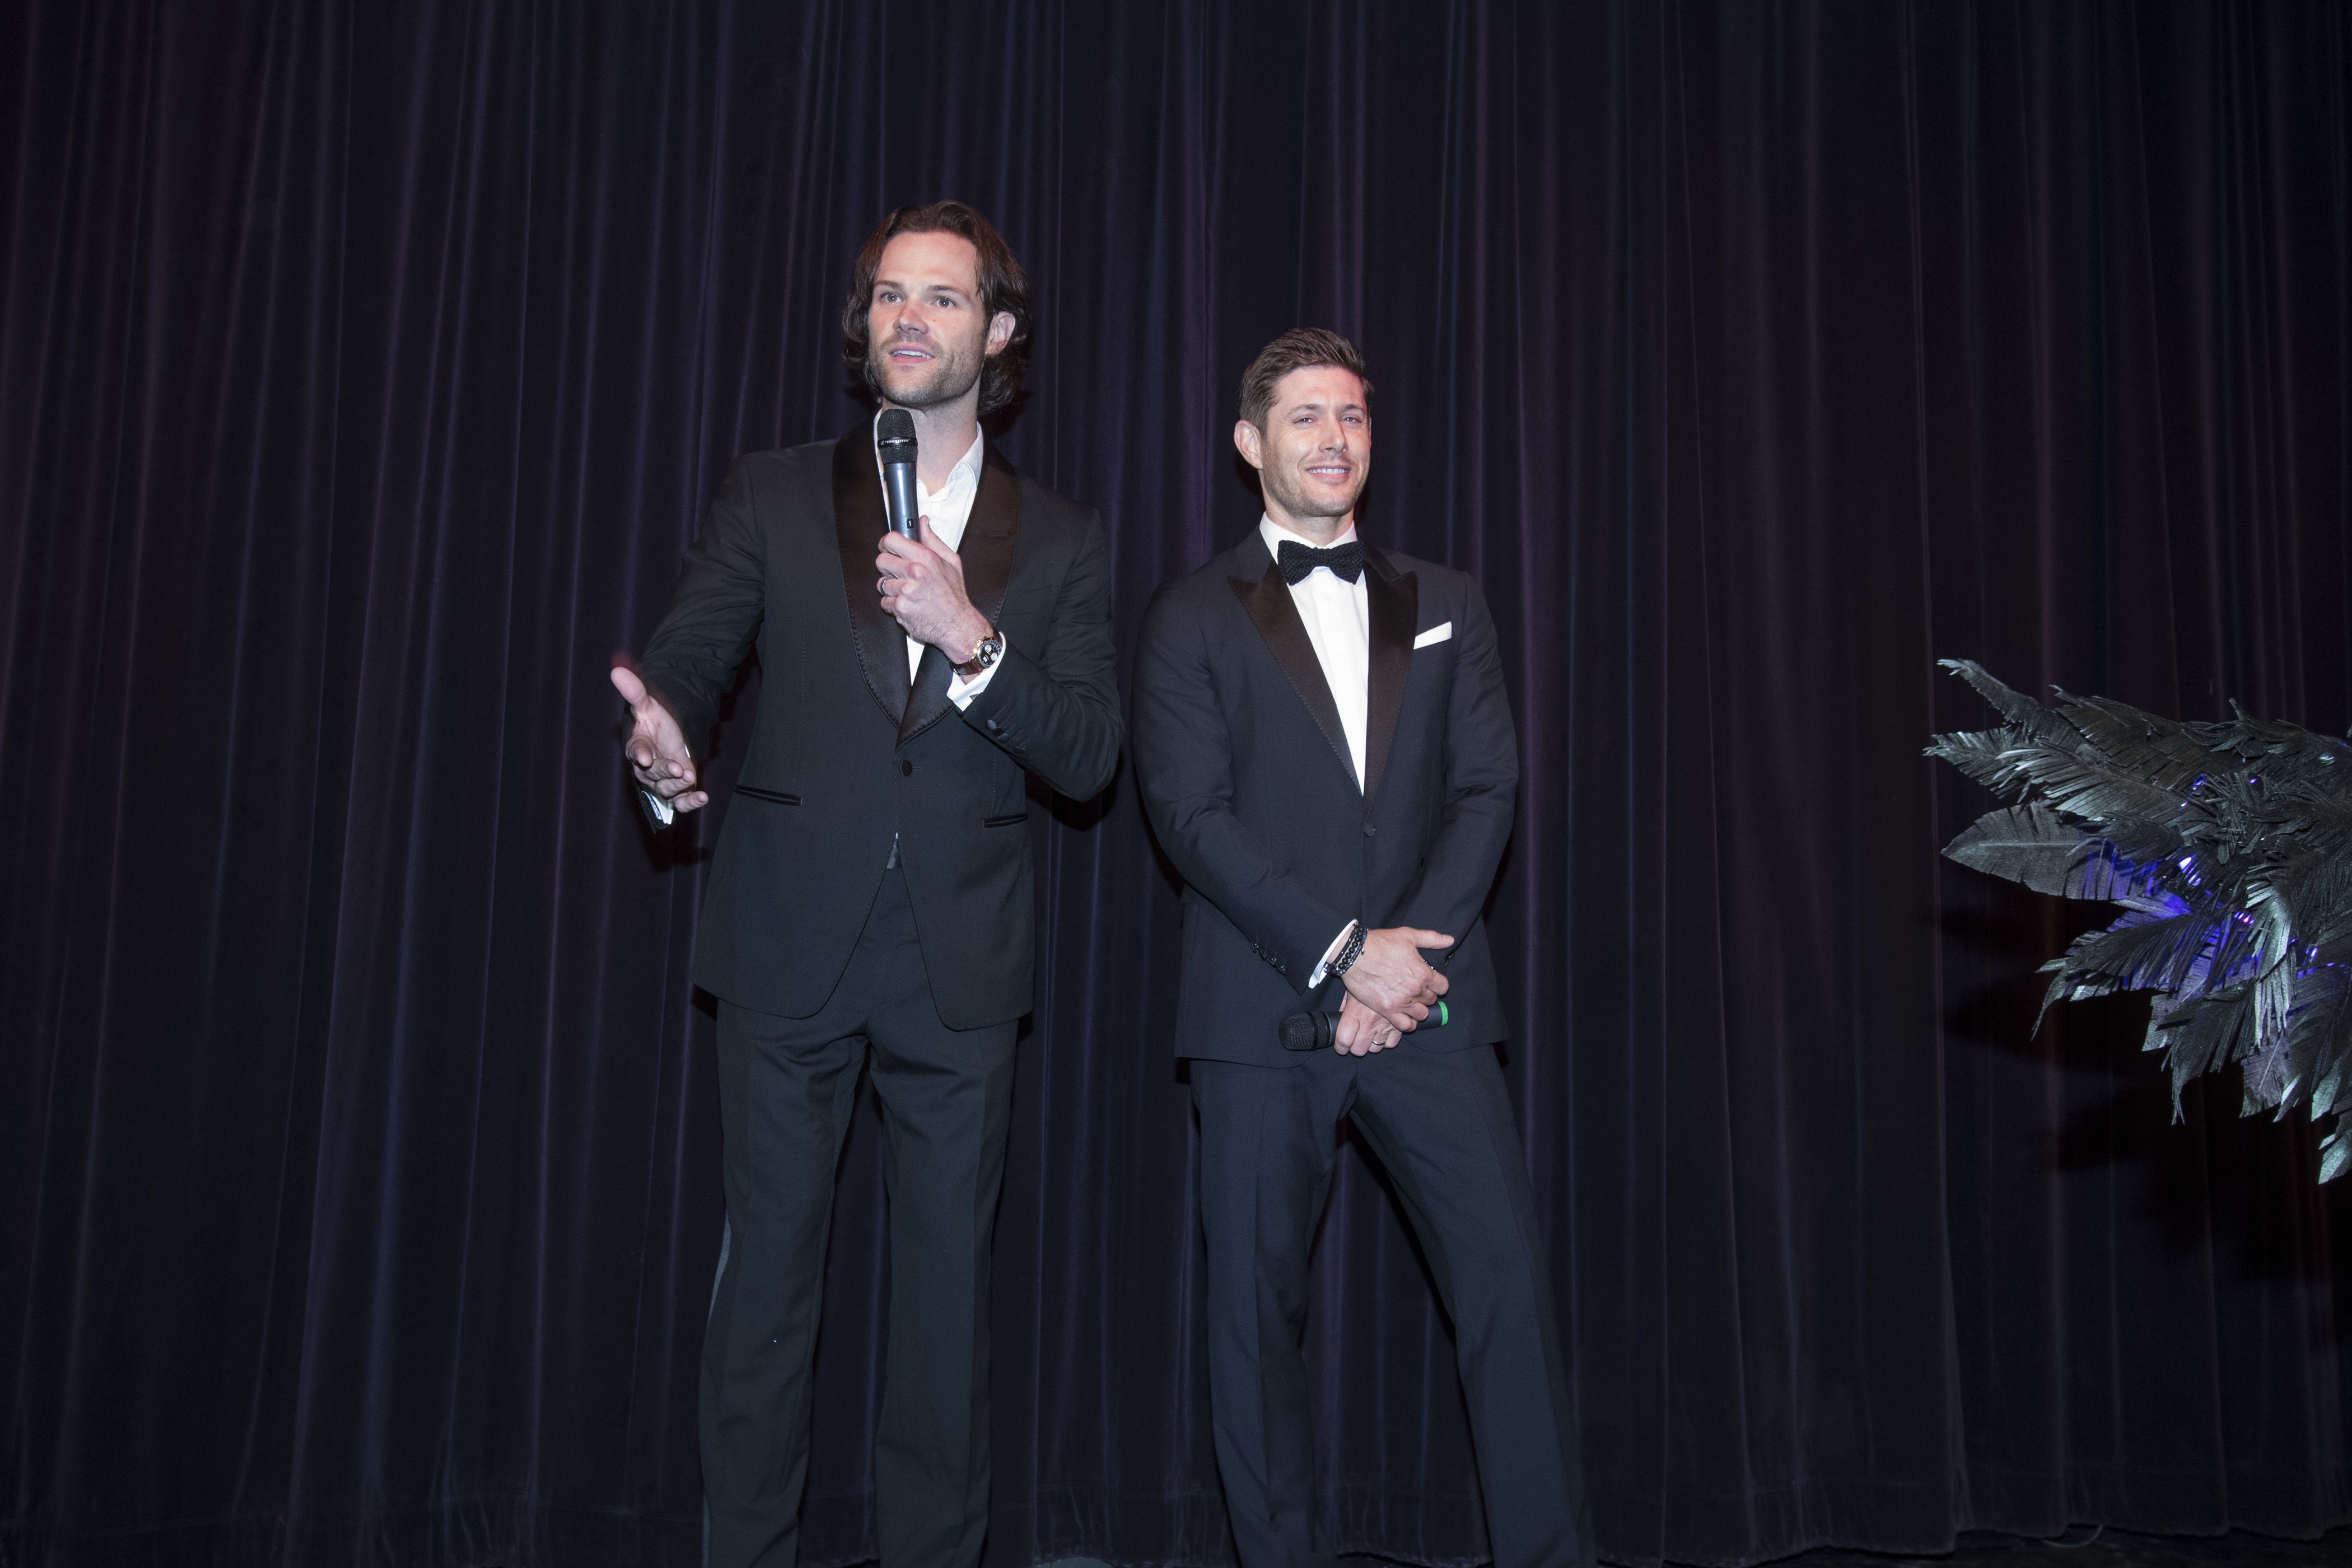 Supernatural 300th Episode Red Carpet Image Reveal the Stars